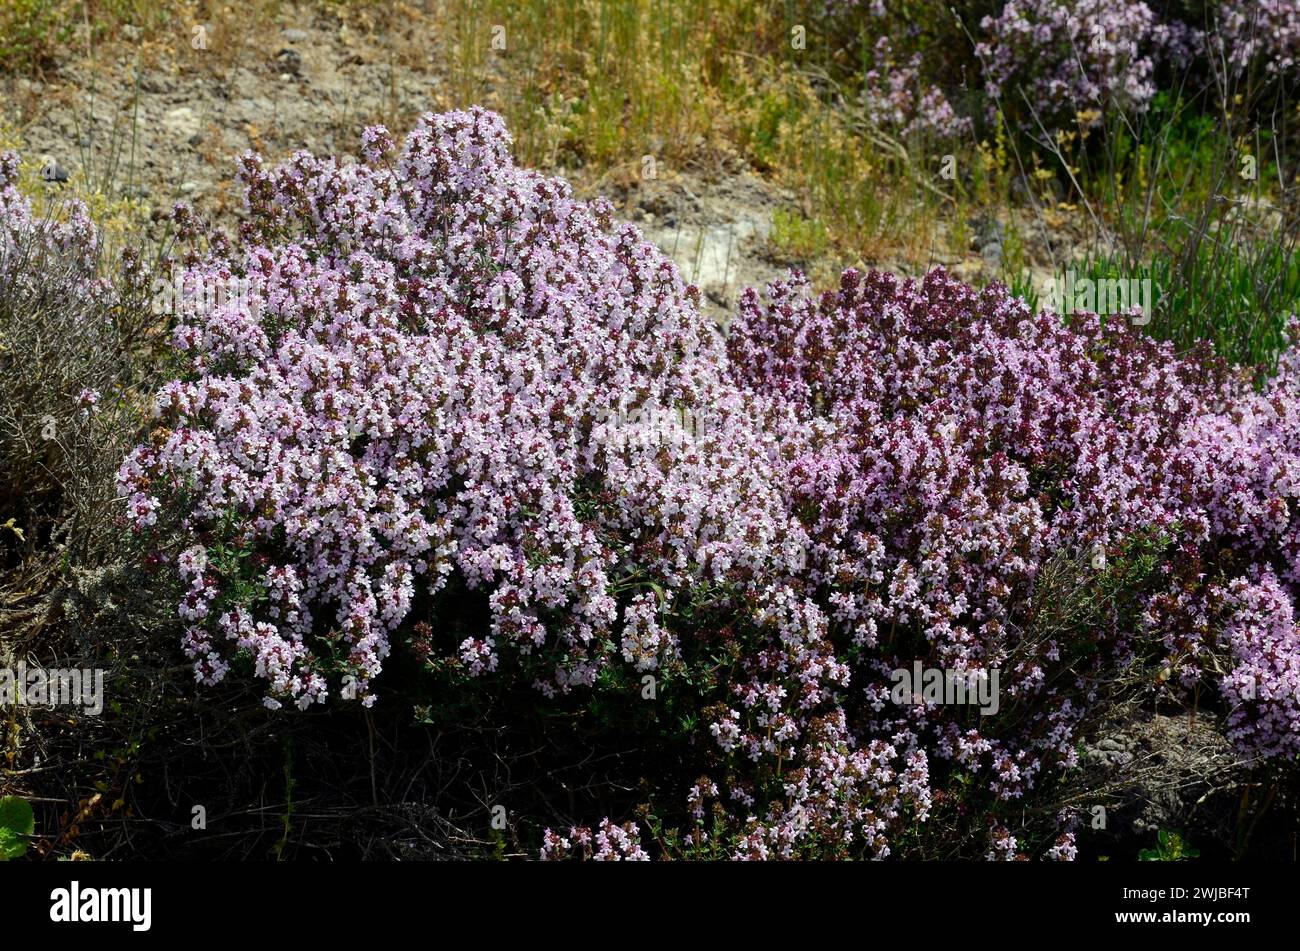 Detail of some thyme bushes (Thymus vulgaris) in flower Stock Photo